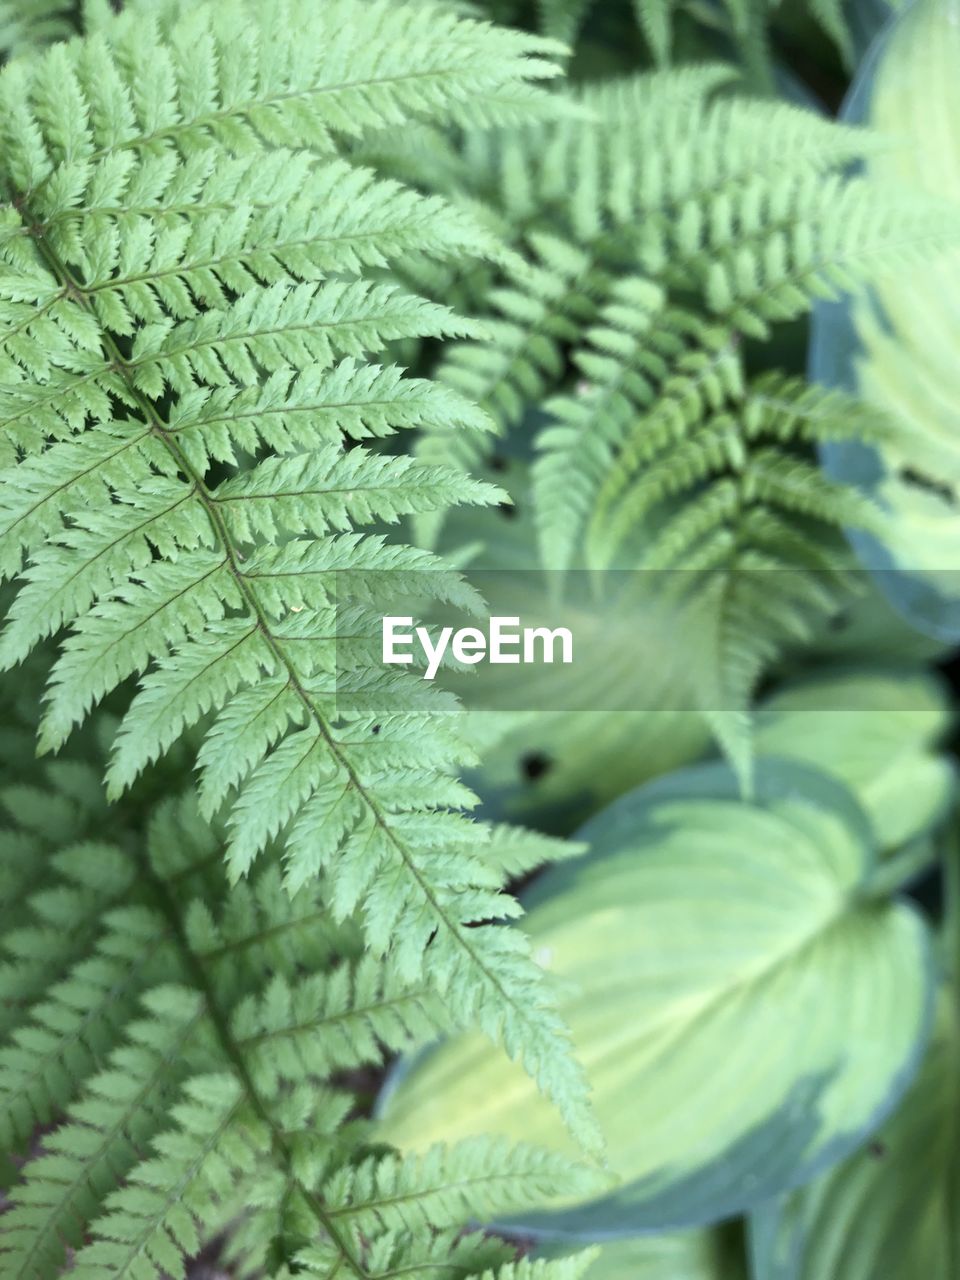 green, leaf, plant part, plant, close-up, growth, flower, nature, no people, beauty in nature, ferns and horsetails, fern, backgrounds, full frame, day, freshness, selective focus, outdoors, tree, focus on foreground, botany, pattern